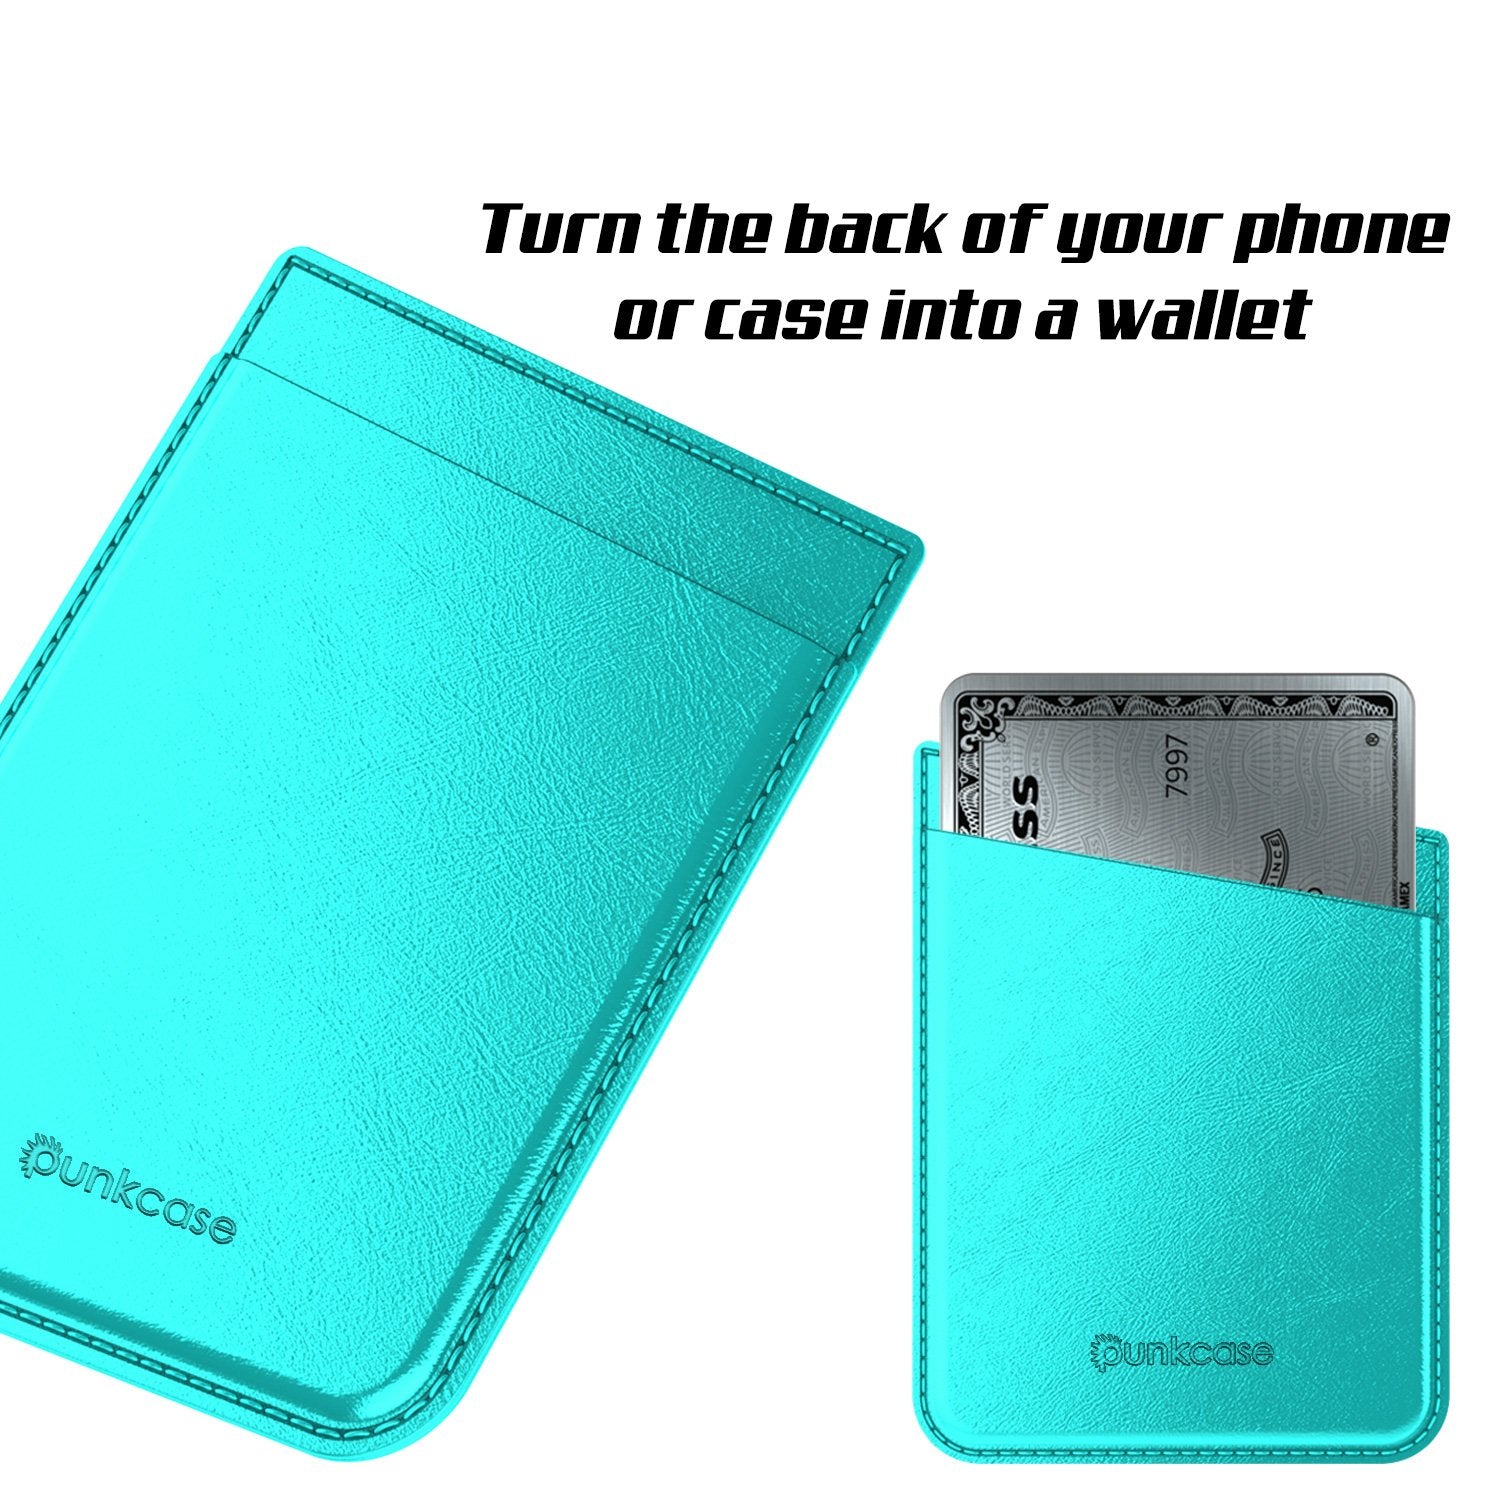 PunkCase CardStud Deluxe Stick On Wallet | Adhesive Card Holder Attachment for Back of iPhone, Android & More | Leather Pouch | [Teal] - PunkCase NZ